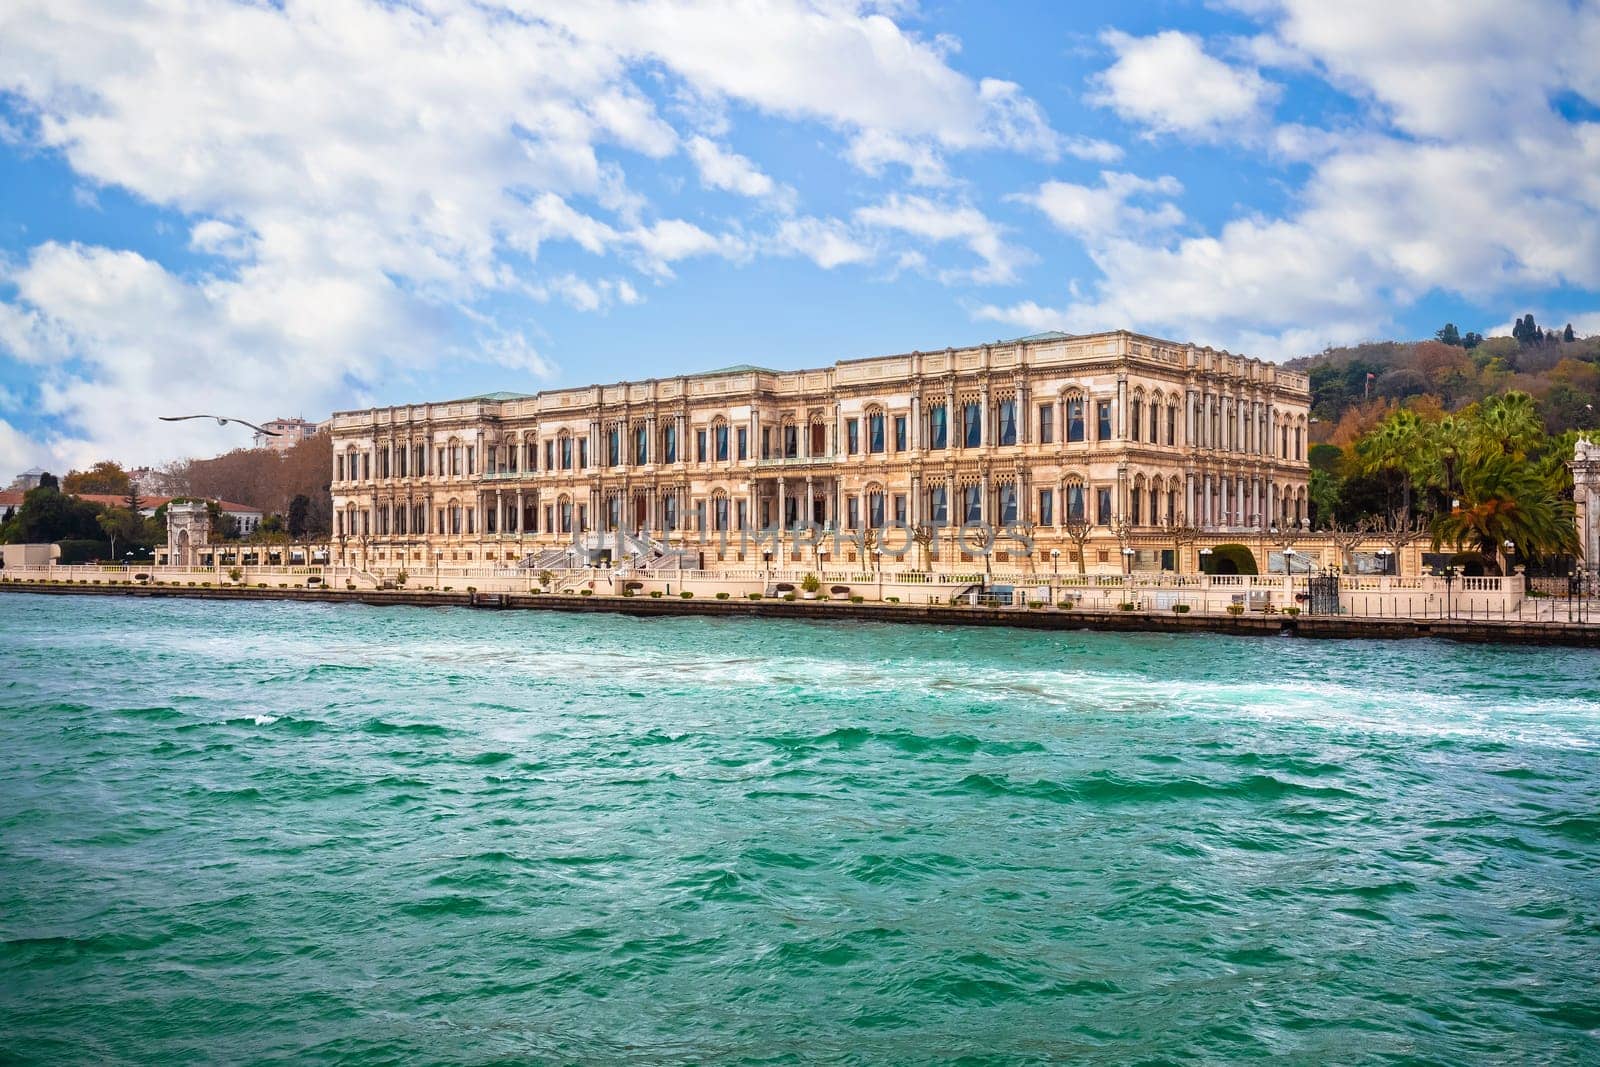 Cıragan Palace and Bosphorus waterfront of Istanbul view, largest city of Turkey